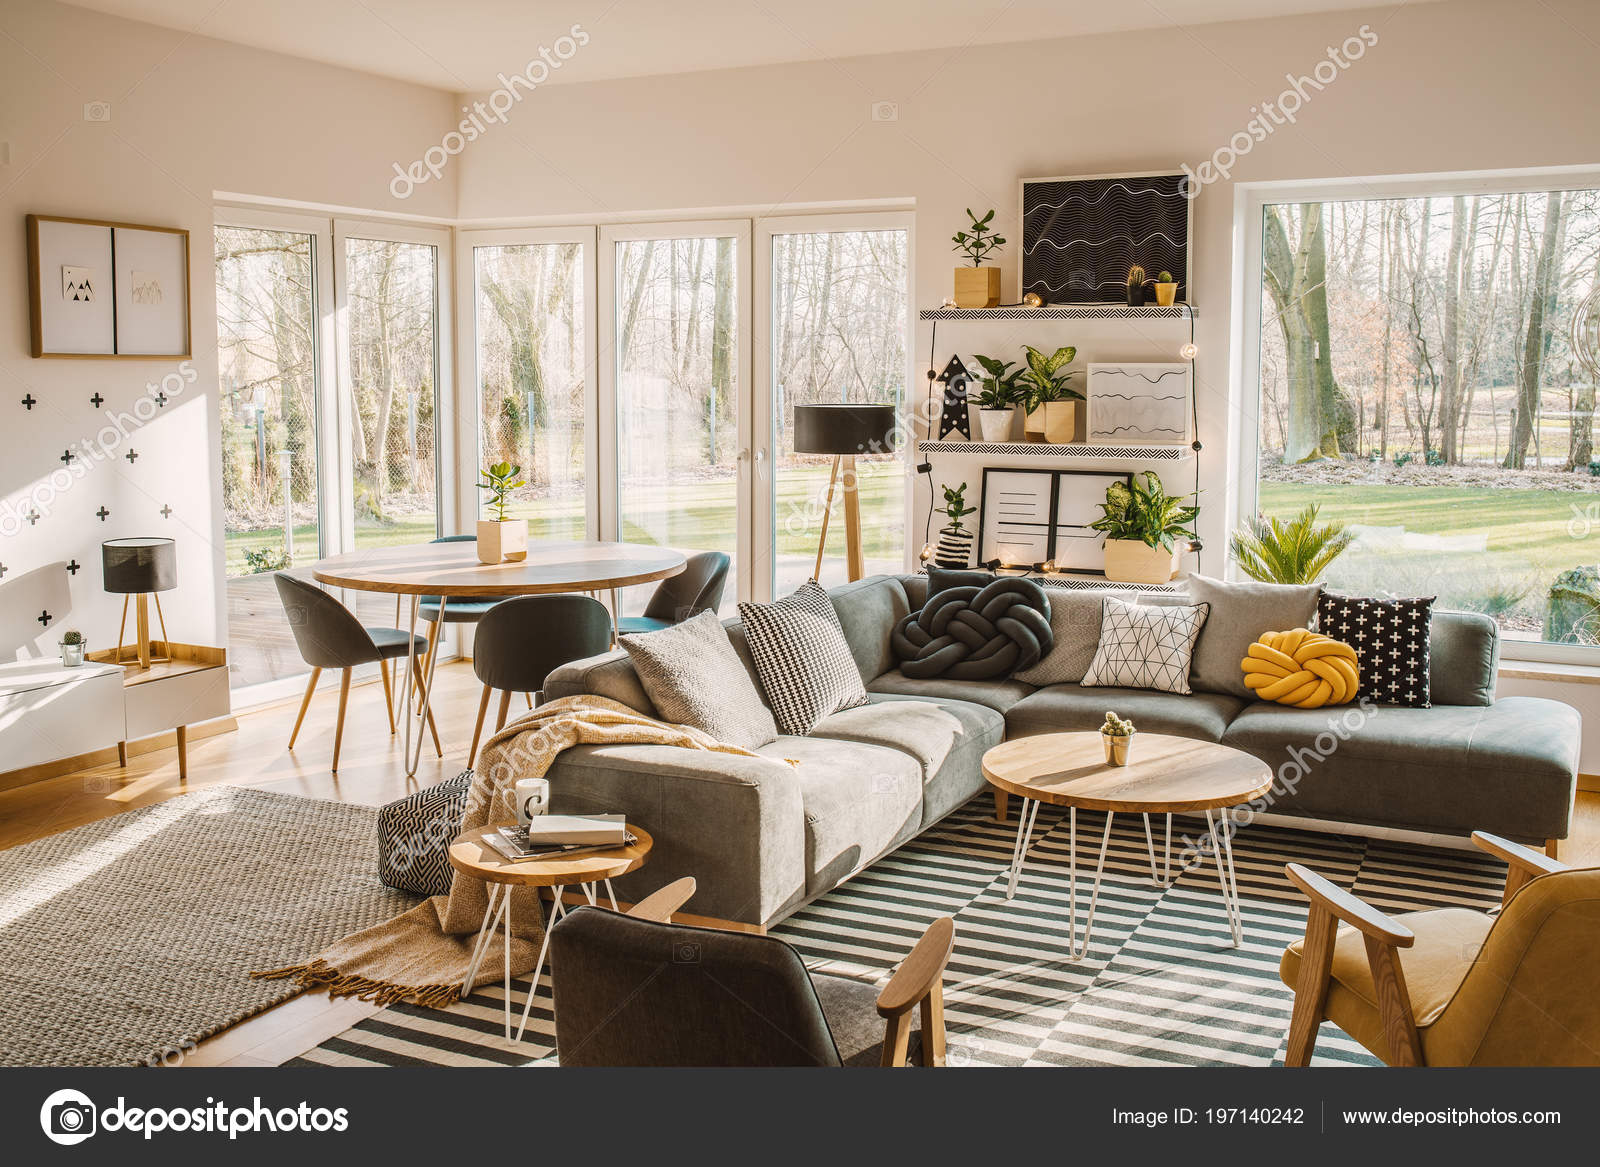 Corner Decoration Ideas For Dining Room Wooden Dining Table Corner Open Space Living Room Interior Nordic Stock Photo Photographeeeu 197140242